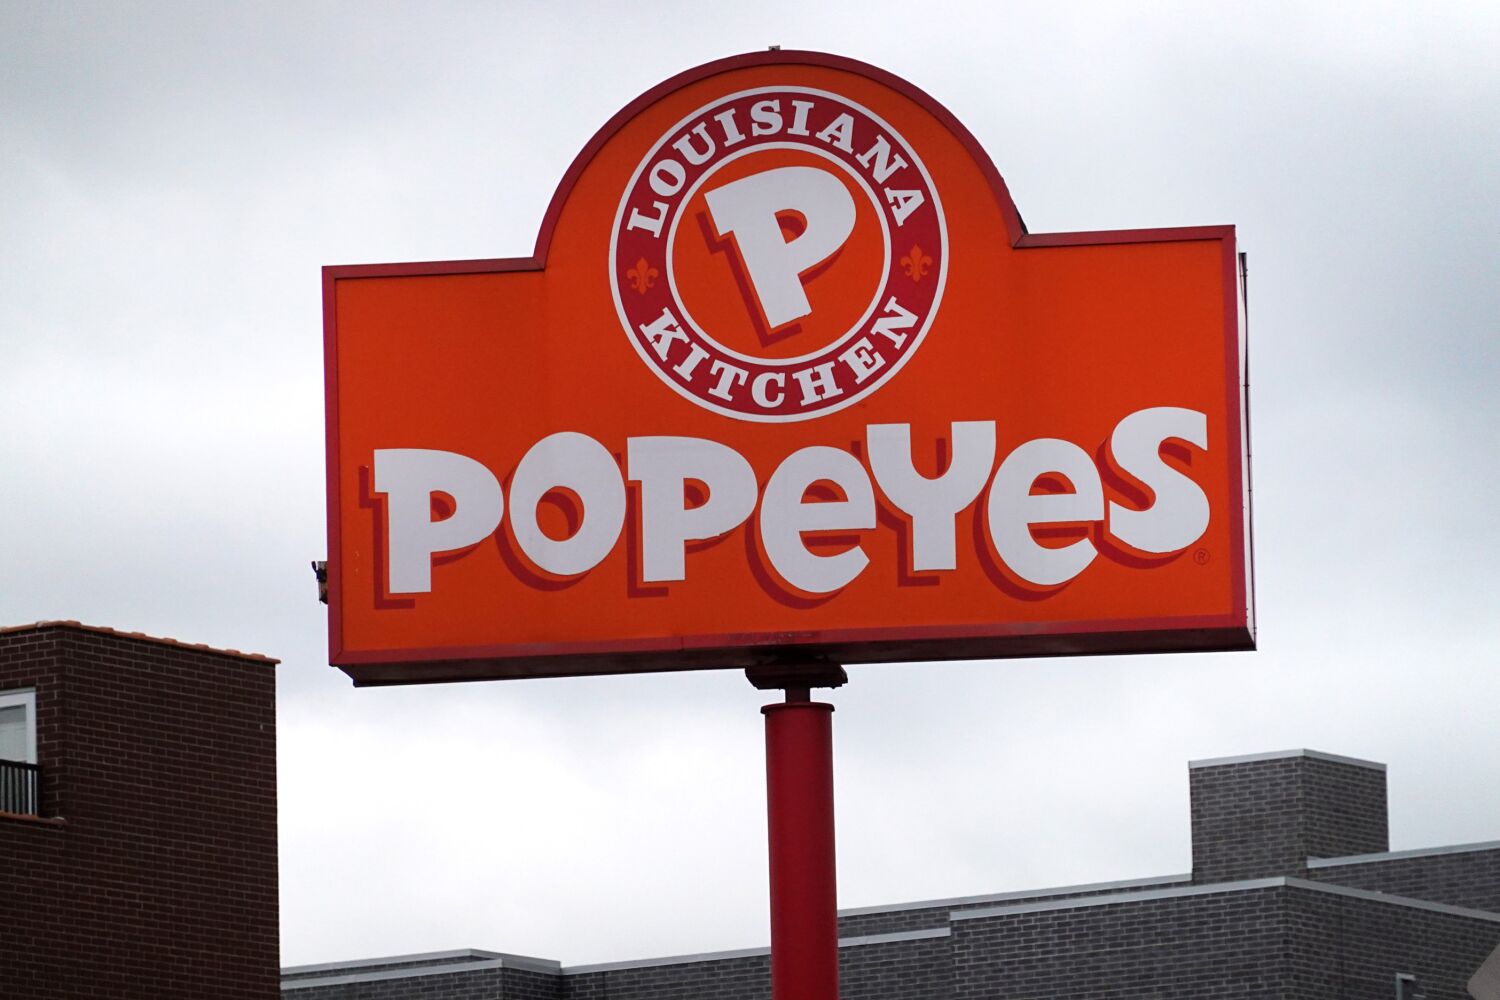 Employees at Oakland Popeyes allege illegal child labor practices, harassment 